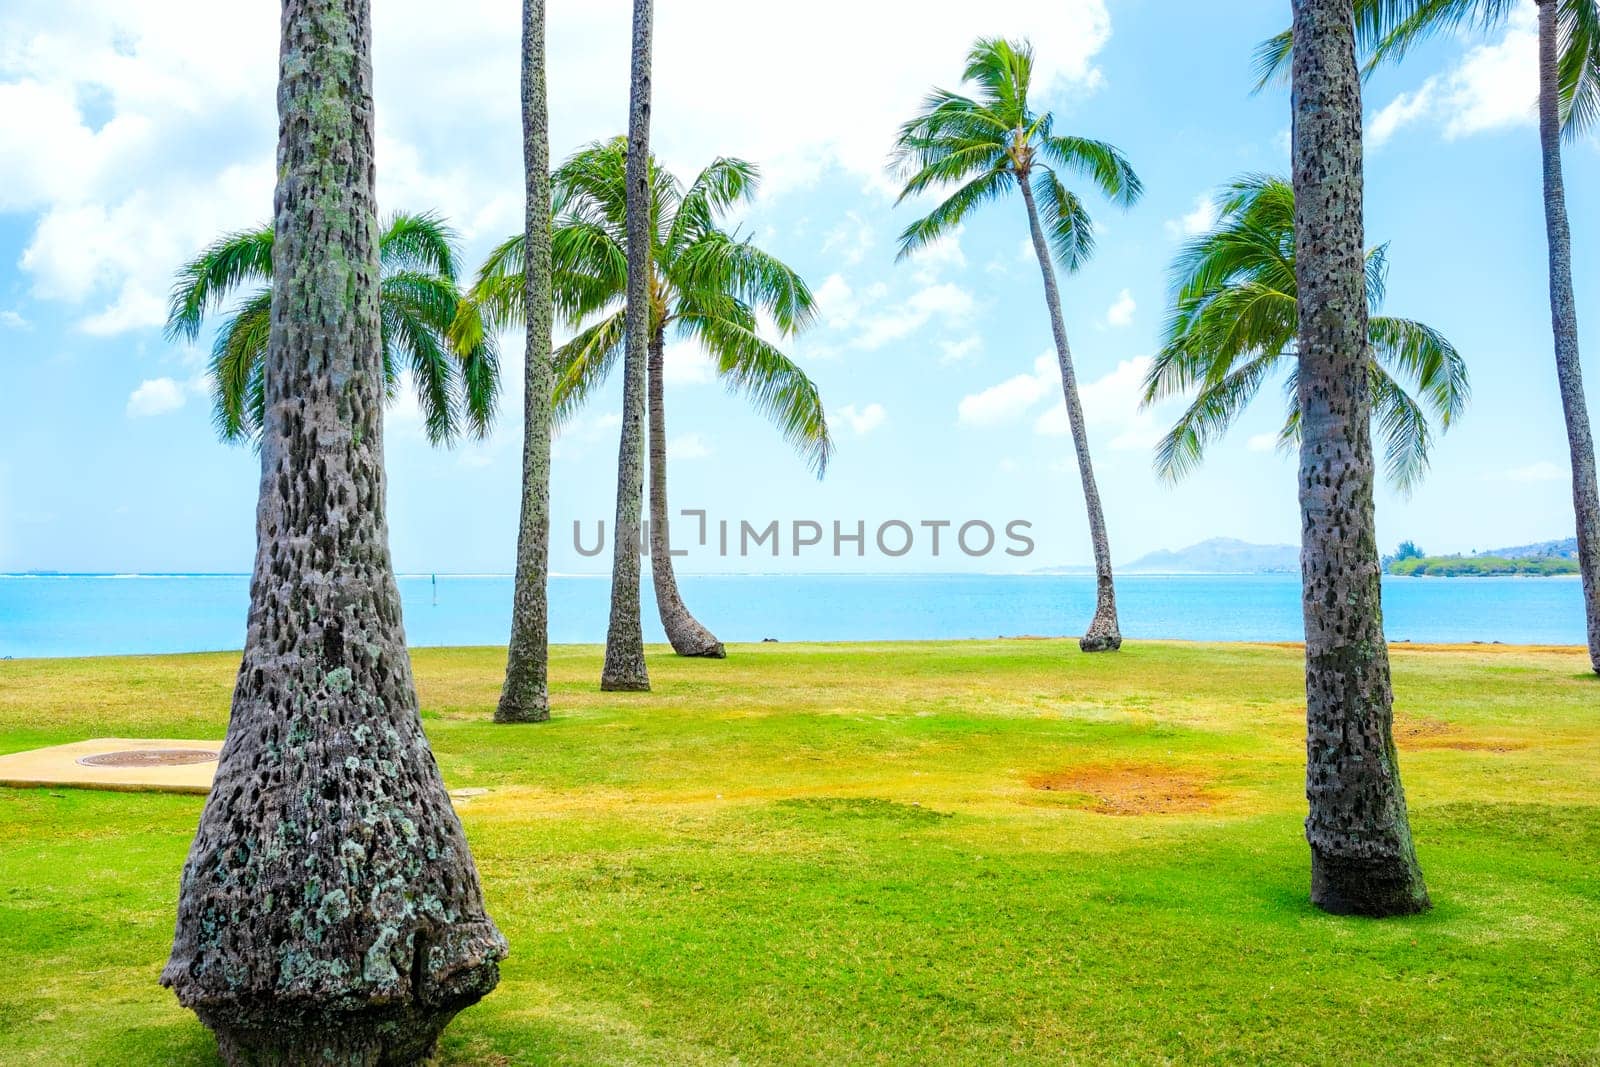 Green lawn with palm and coconut trees along the blue Pacific ocean in Hawaii